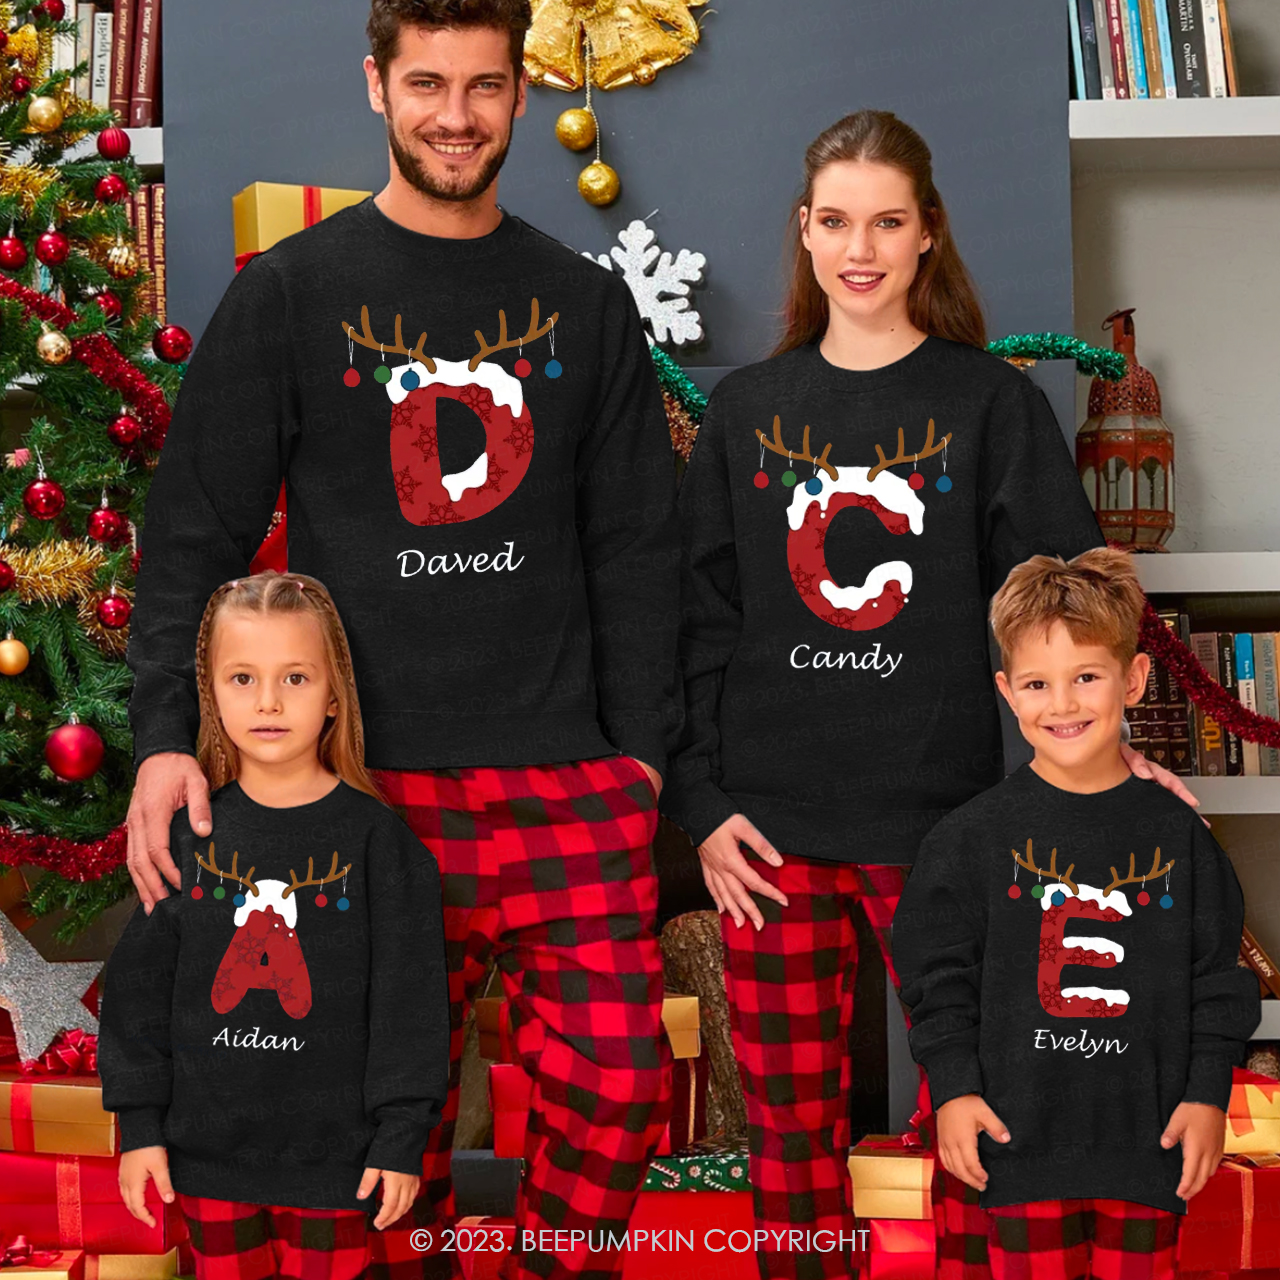 Santa Superman Matching Christmas Family Pajamas For Holiday Outfit Sale -  The Wholesale T-Shirts By VinCo